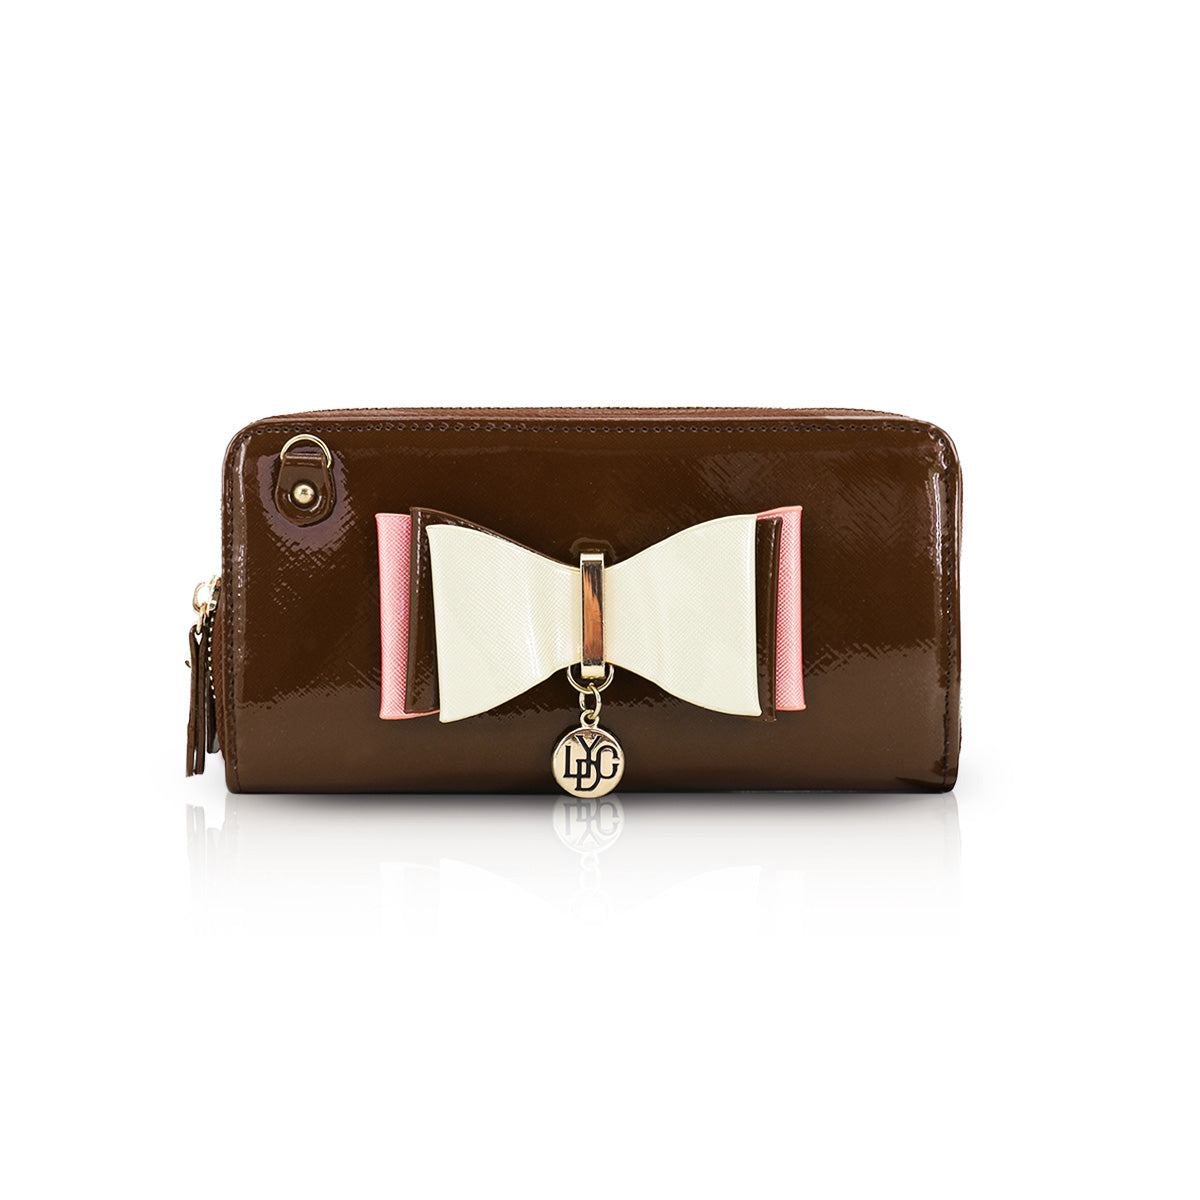 LYDC Ladies Purse, Women’s Wallet with Two Compartments, Beautiful Bow Design and Coin Pendant, Multiple Inner Pockets